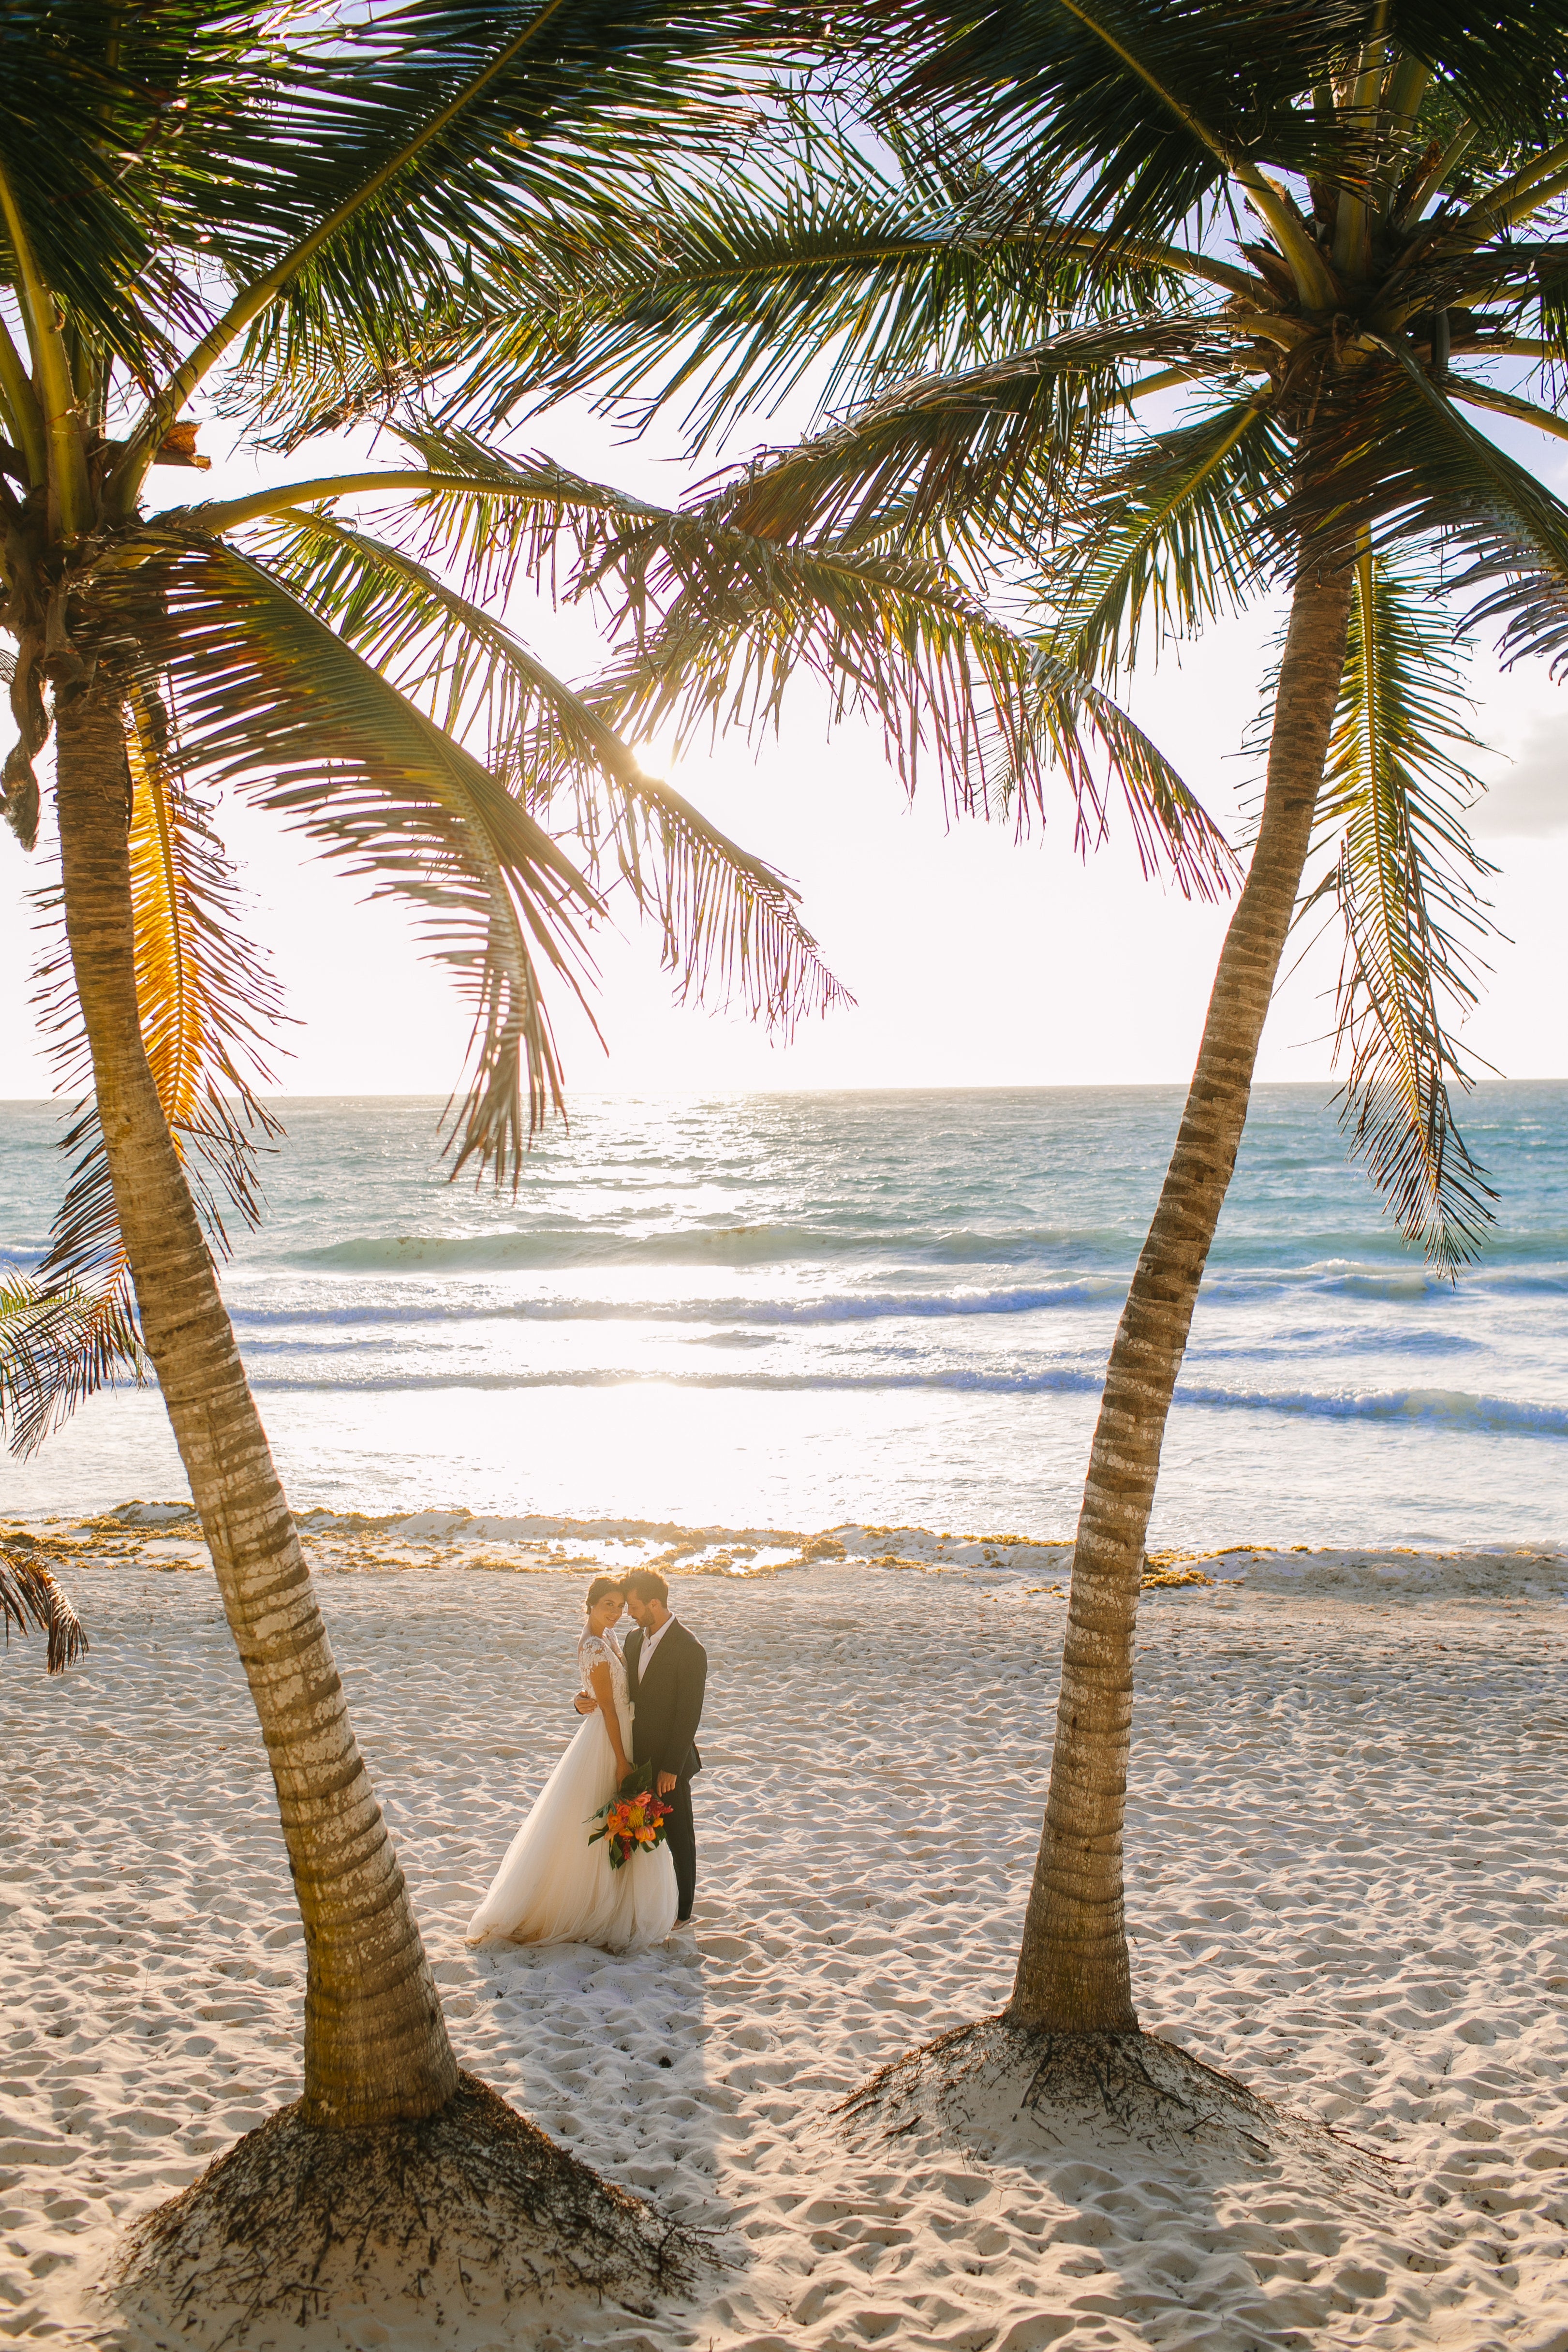 Tulum Weddings Are Unbelievably Romantic—Here's Proof: We took Kleinfeld Bridal wedding dresses and Kleinfeld Bridal Party bridesmaids dresses to Tulum, Mexico for a fun photoshoot on the beach full of flowers, sun, sand and fun!